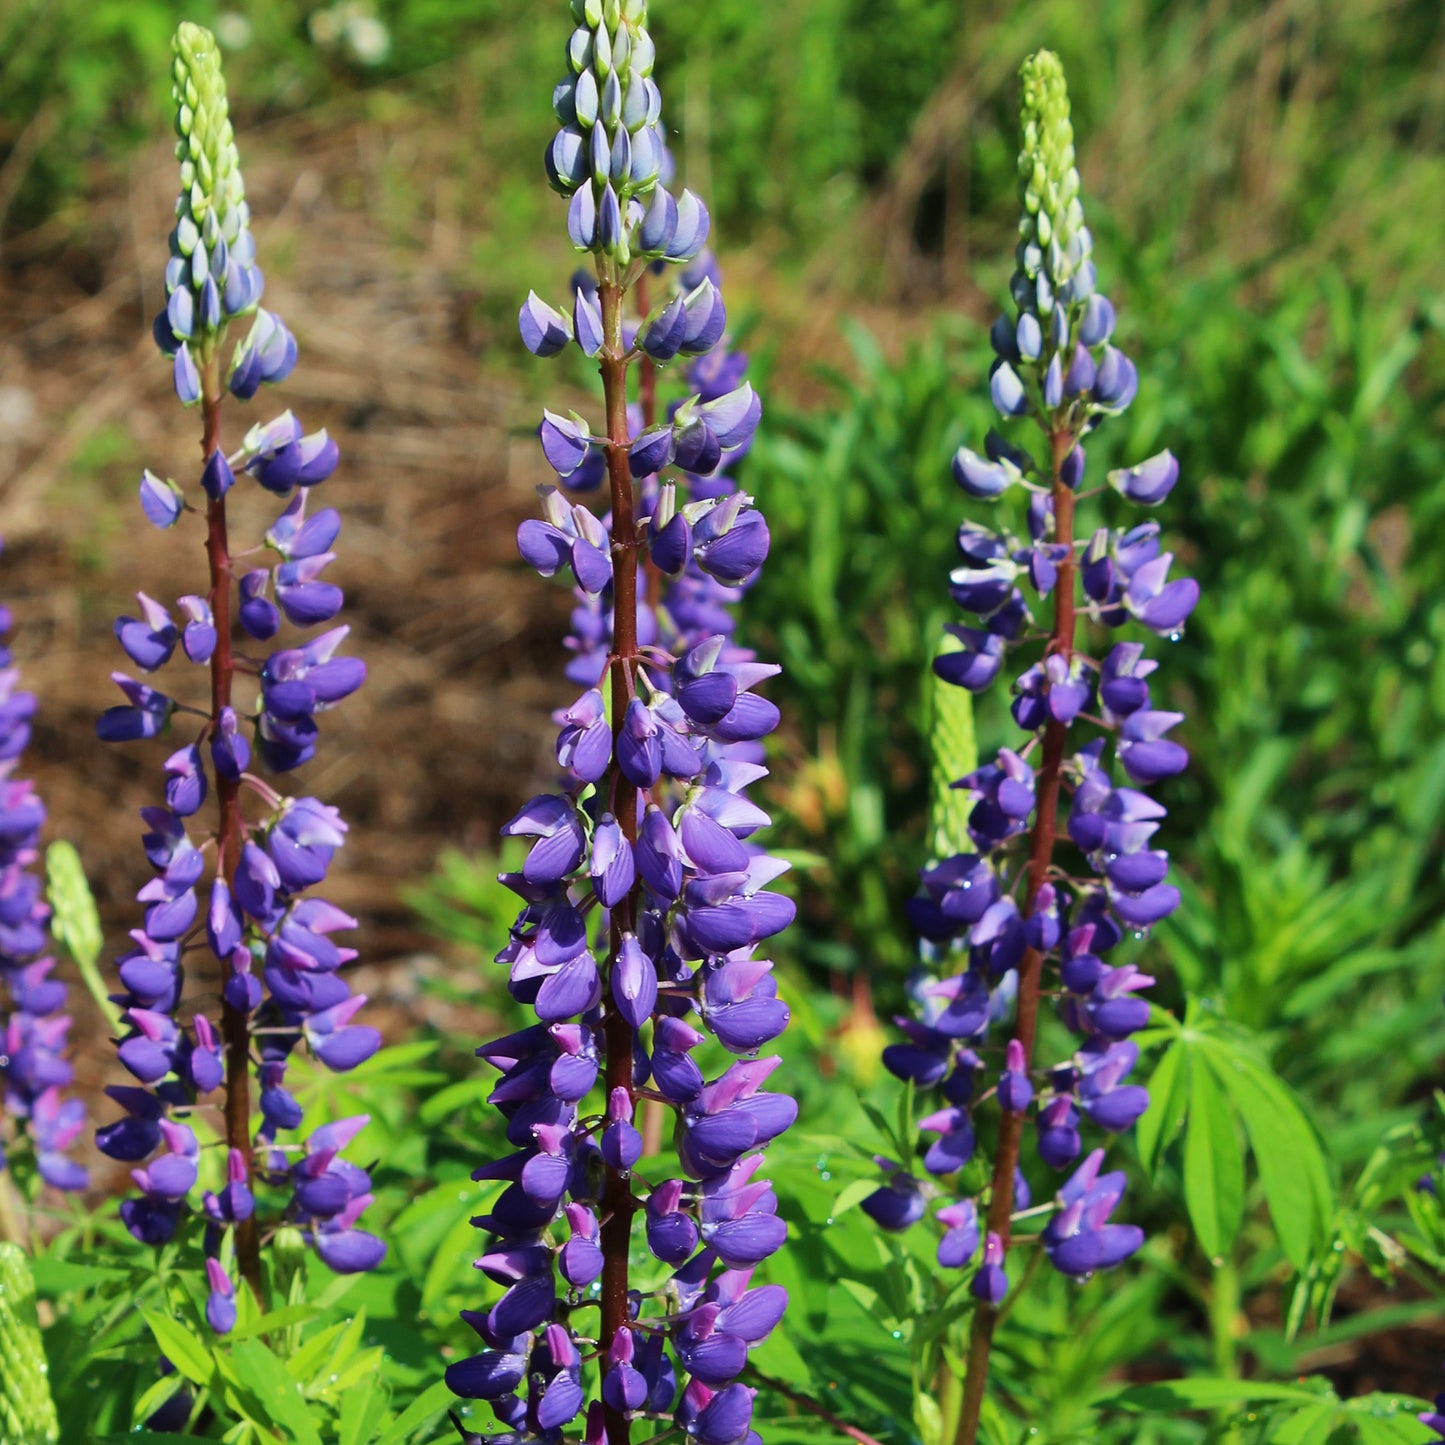 Russells Hybrid Mixed Colors Lupine seeds fully matured and blooming on their tall stalks in a garden.